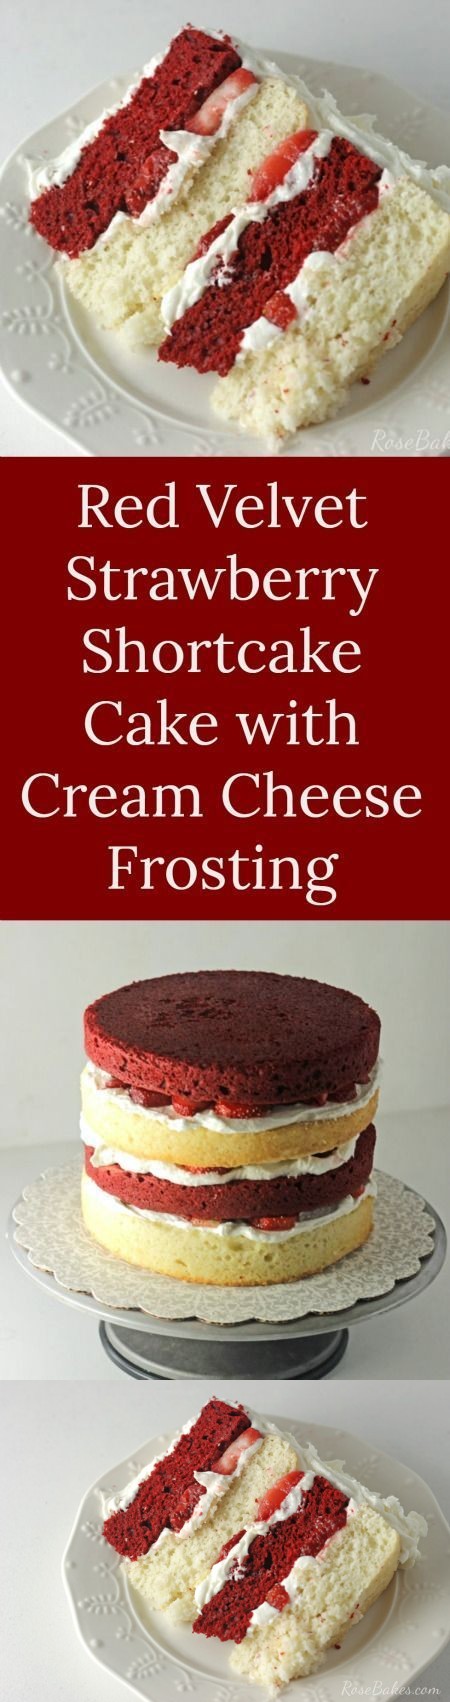 Red Velvet Strawberry Shortcake Cake with Cream Cheese Frosting